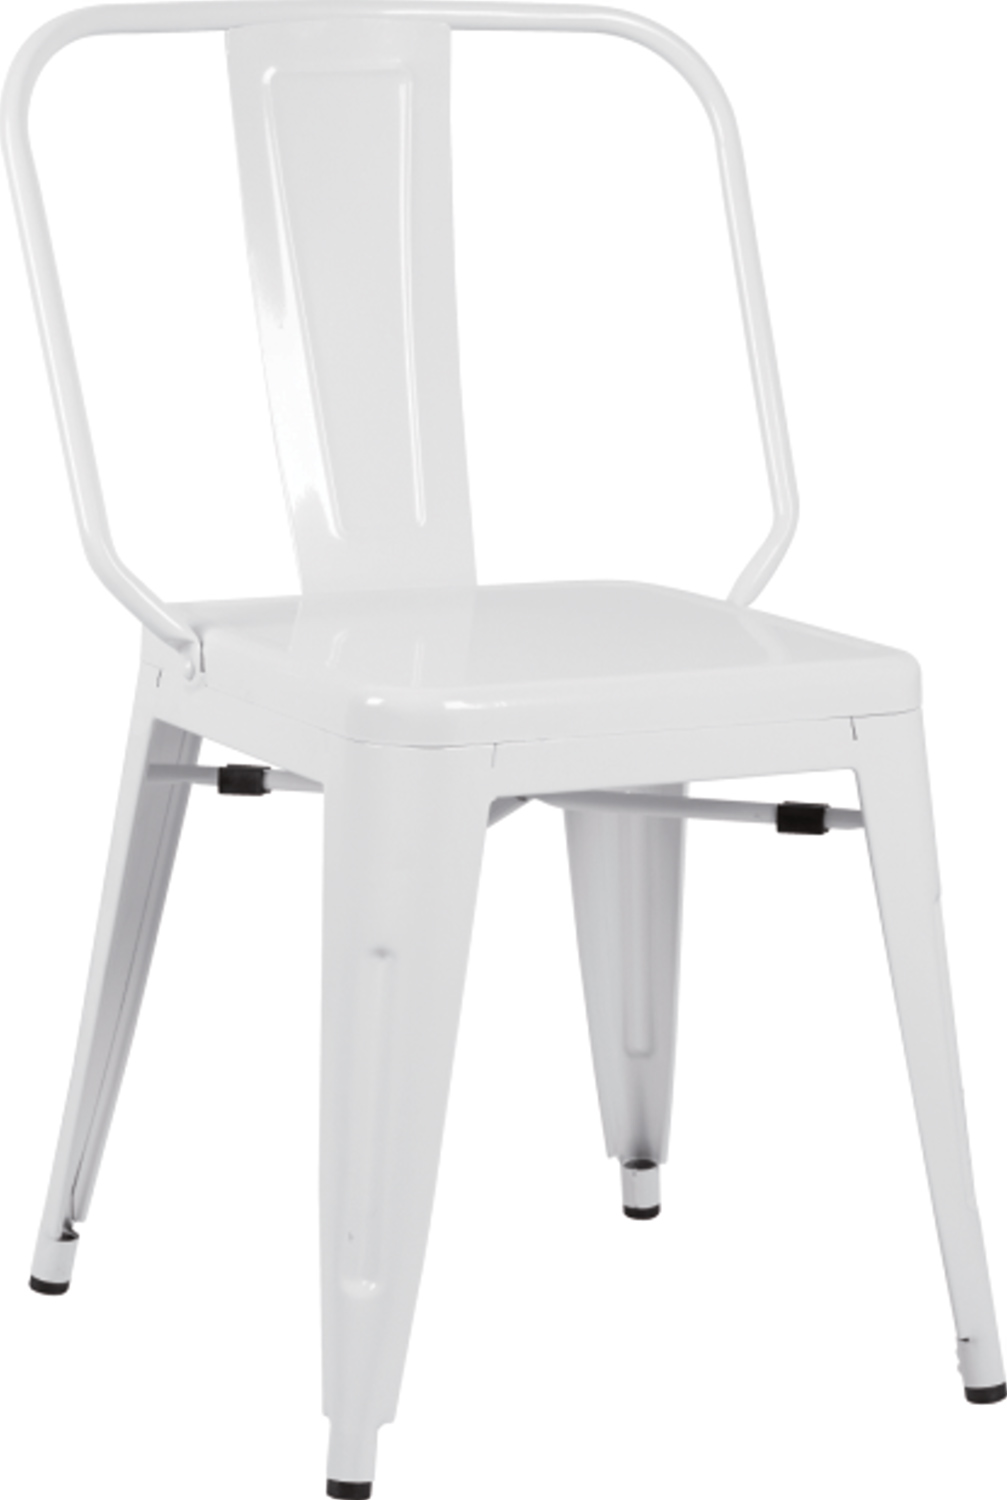 Chintaly Imports 8021 Galvanized Steel Side Chair - White